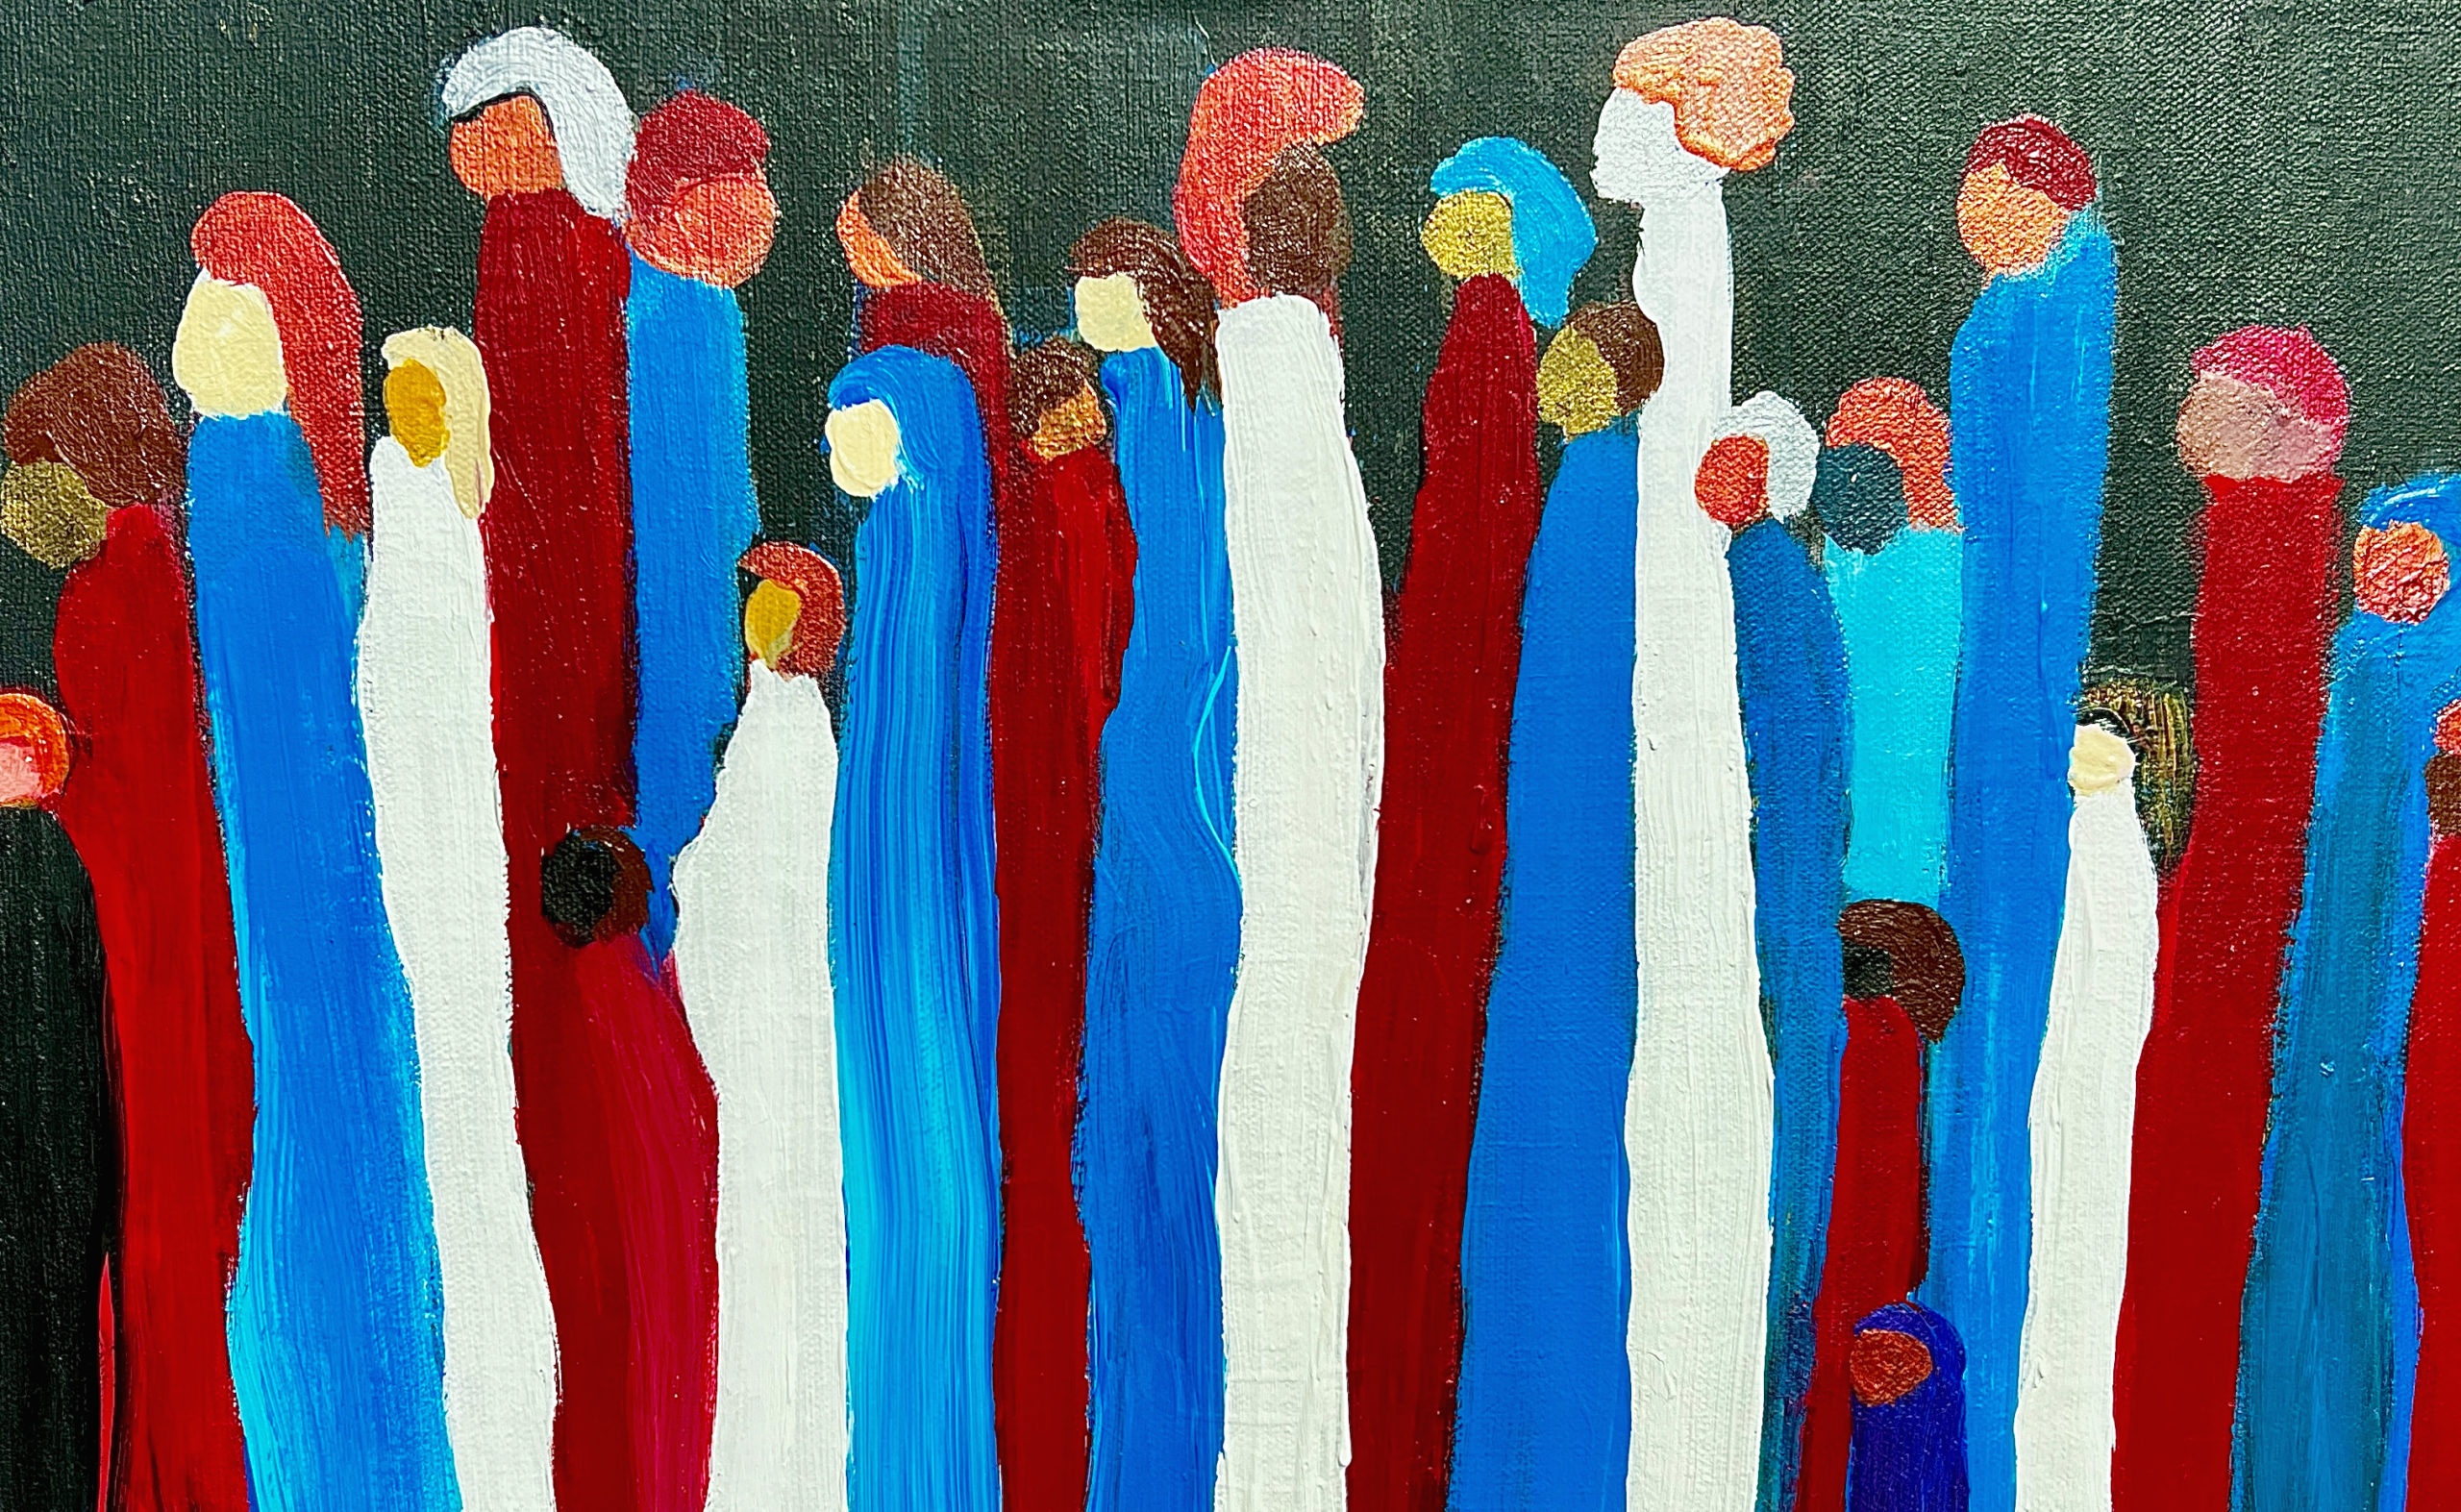 Abstract depiction of a diverse group of people who could be at the polls, or simply in a crowd, or celebrating US Independence Day, July 4, Fourth of July, Memorial Day. Colors of the American flag - red, white, blue. Original acrylic painting by Jane Elizabeth.